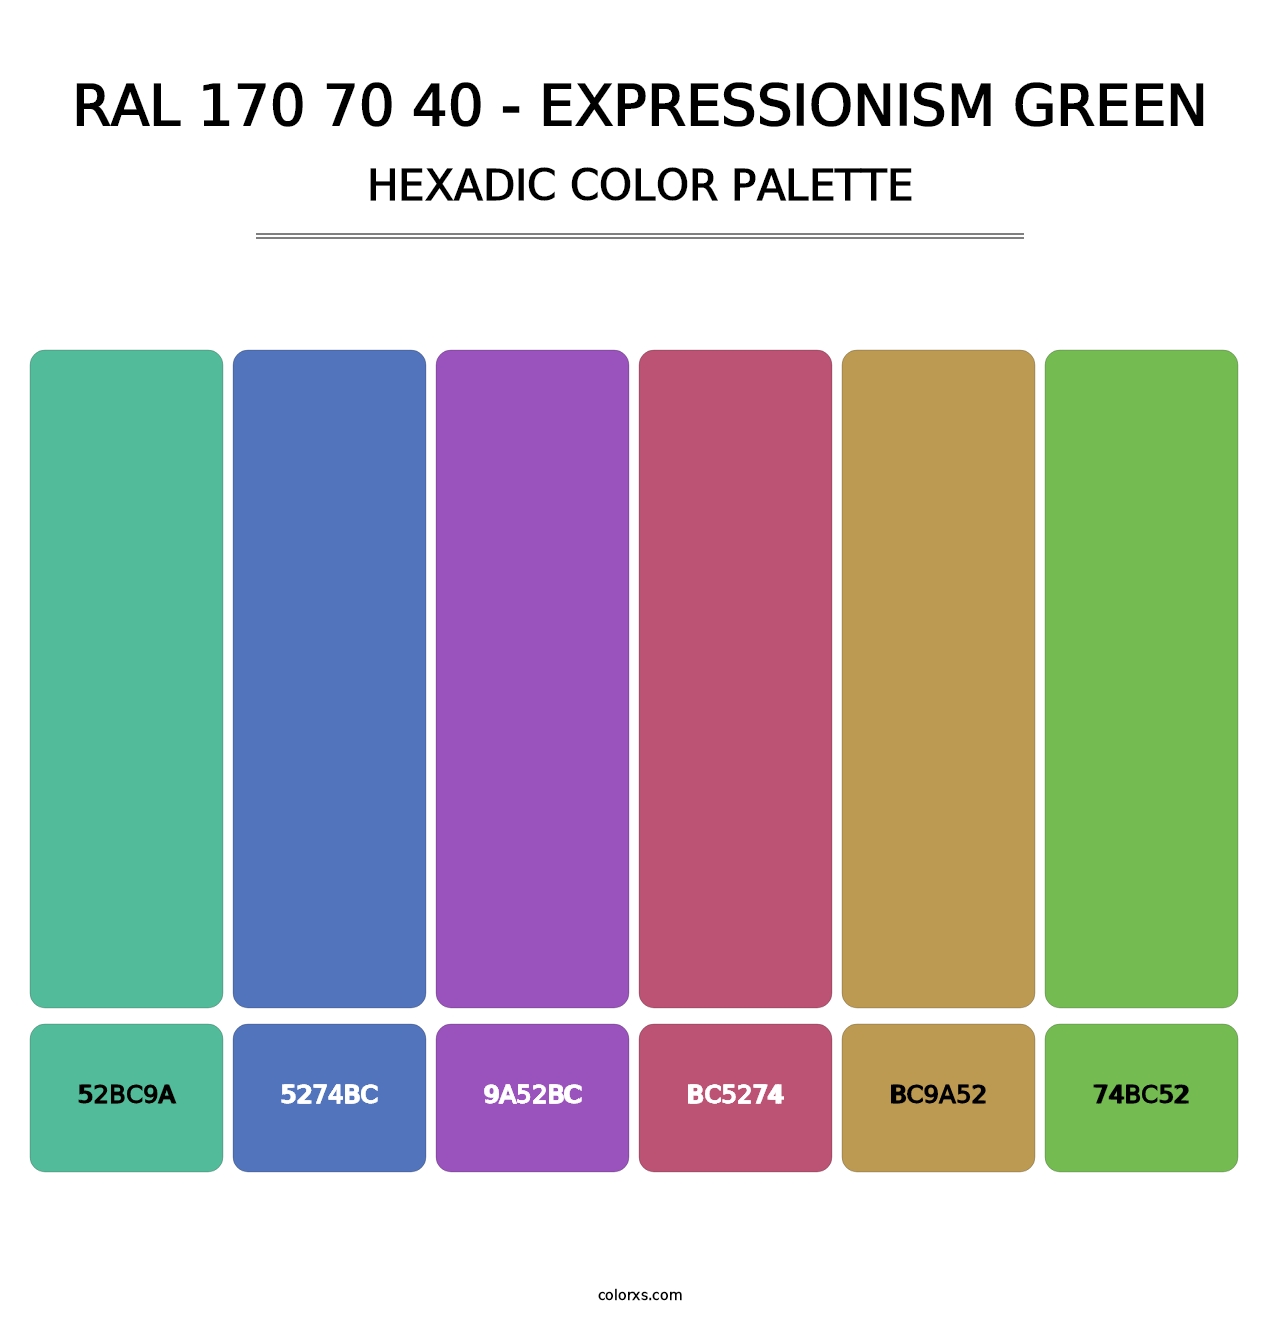 RAL 170 70 40 - Expressionism Green - Hexadic Color Palette